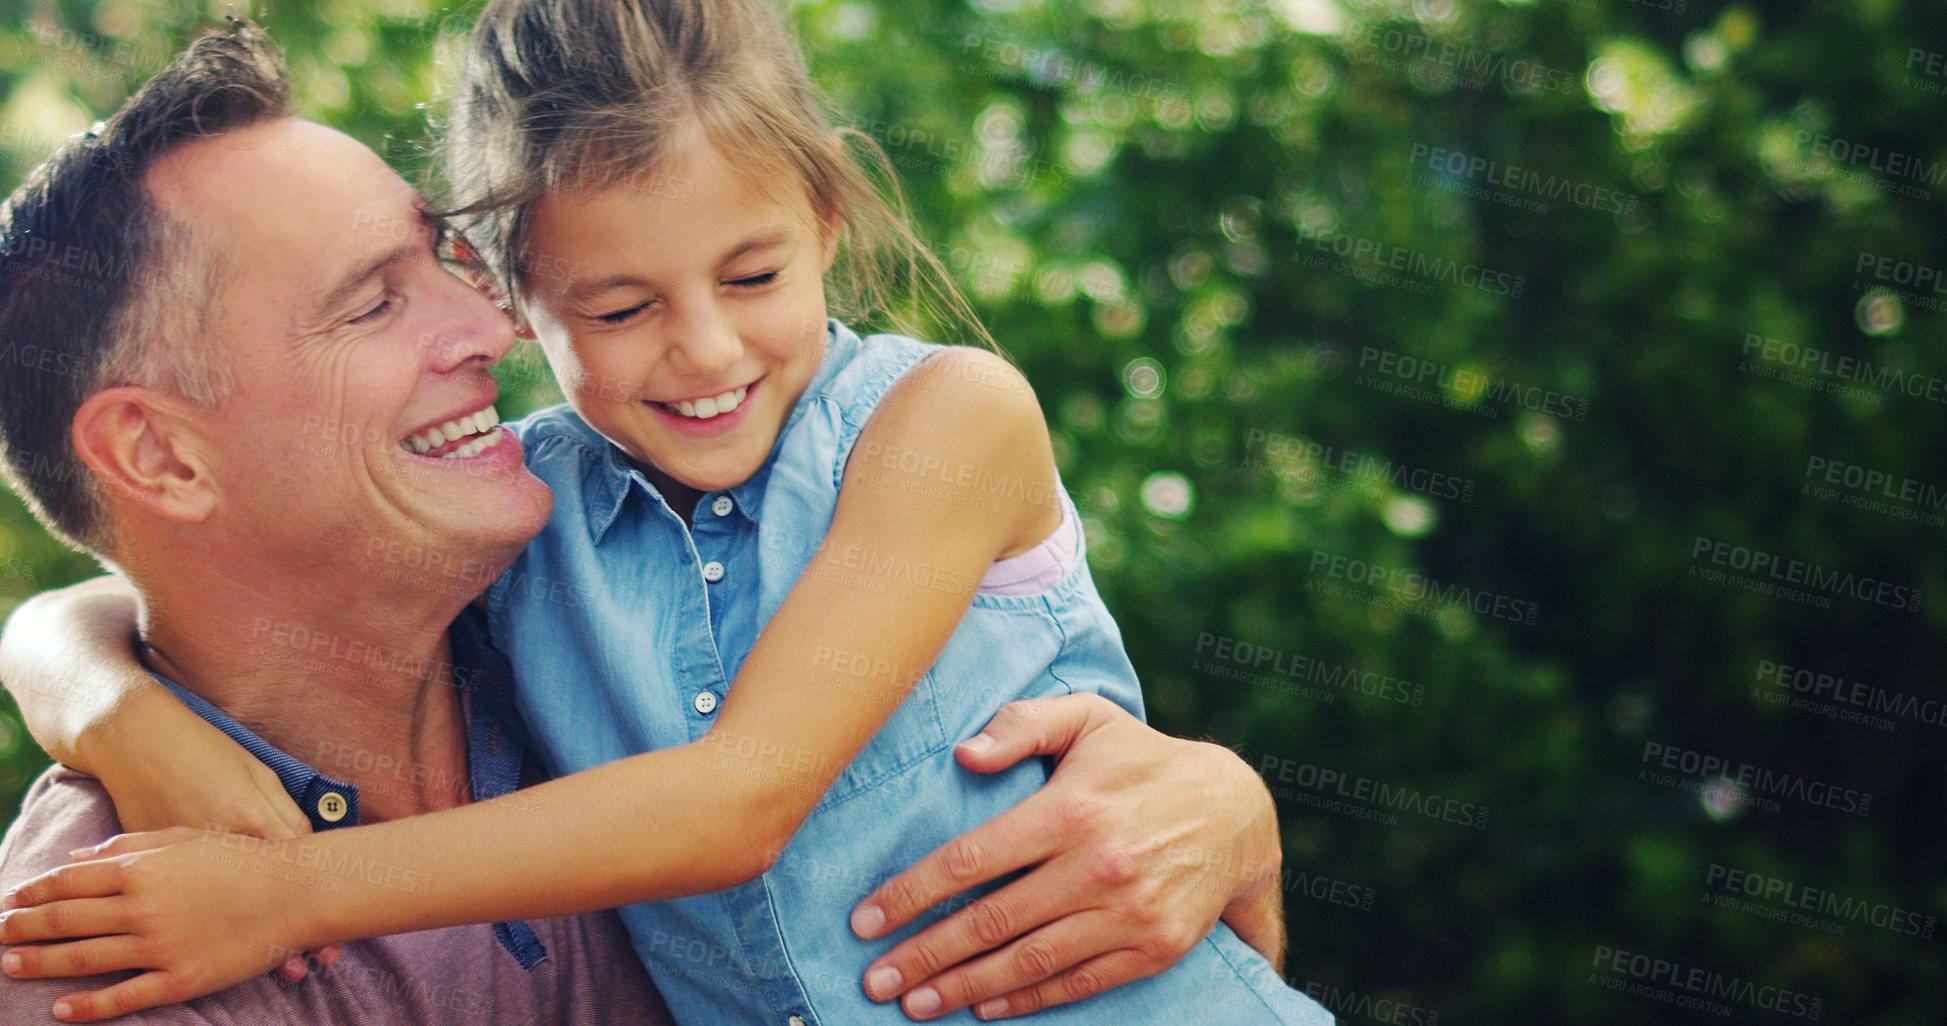 Buy stock photo Shot of an affectionate little girl spending quality time with her father outdoors